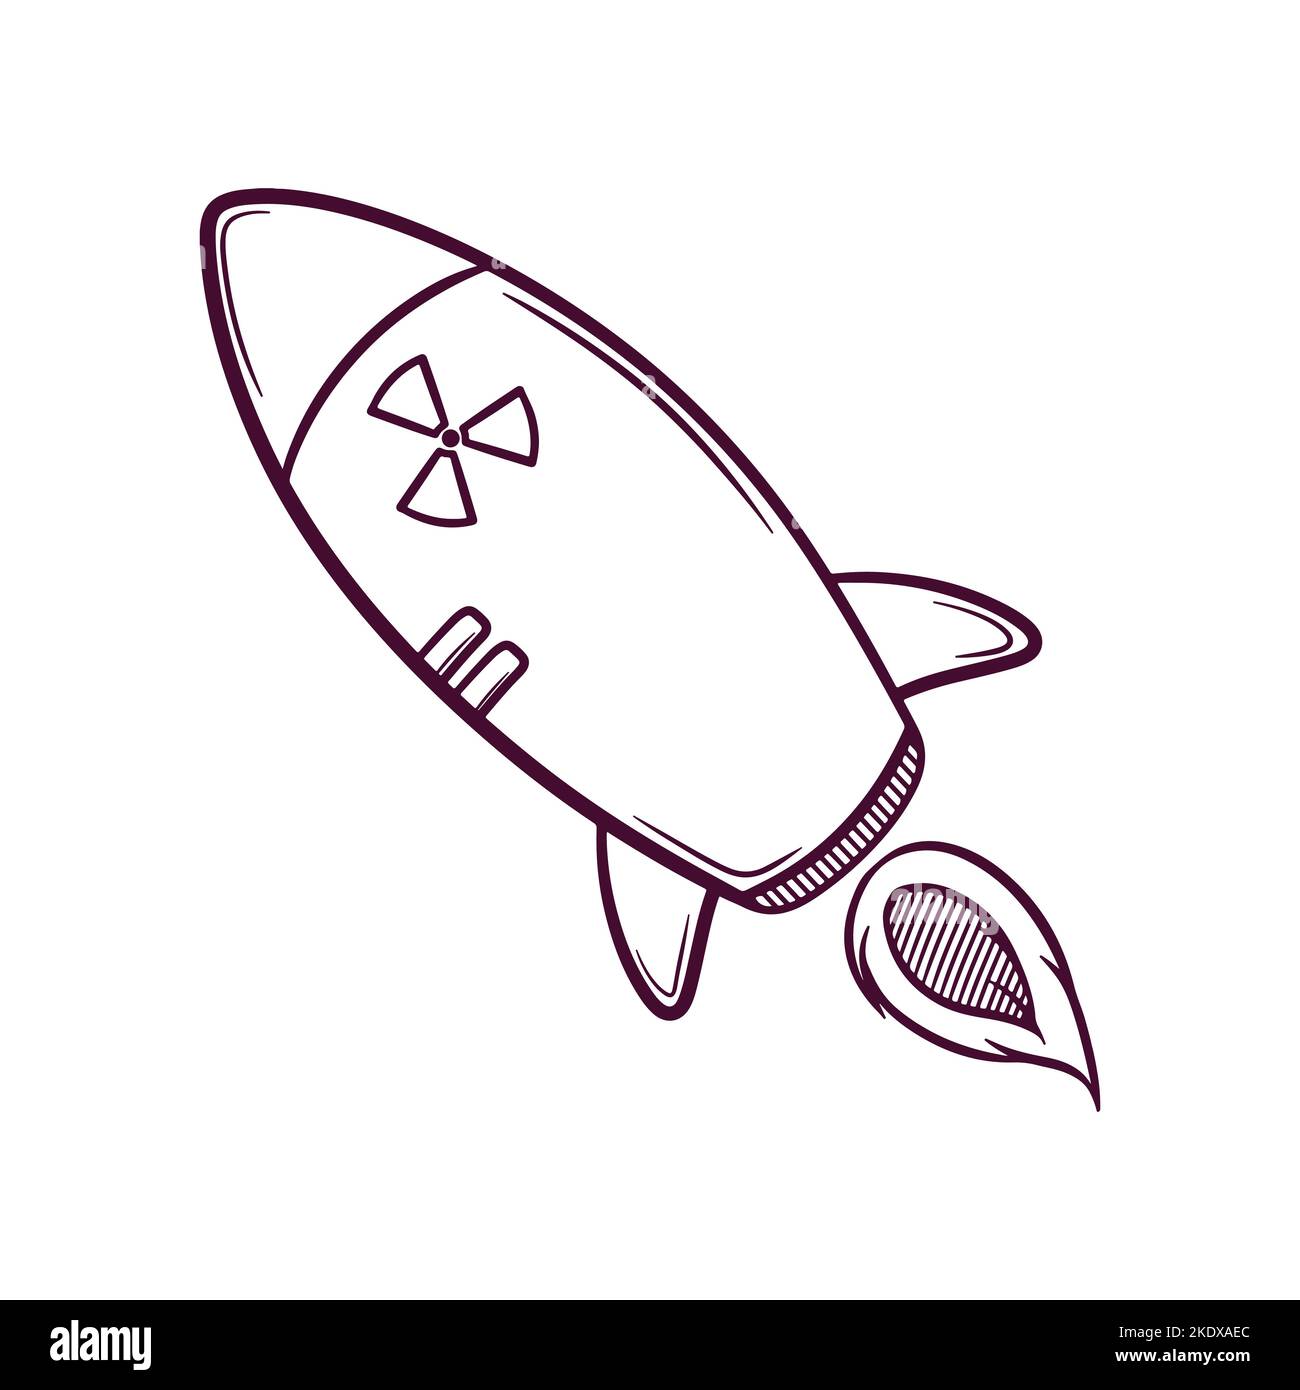 2453 Missile Sketch Images Stock Photos  Vectors  Shutterstock